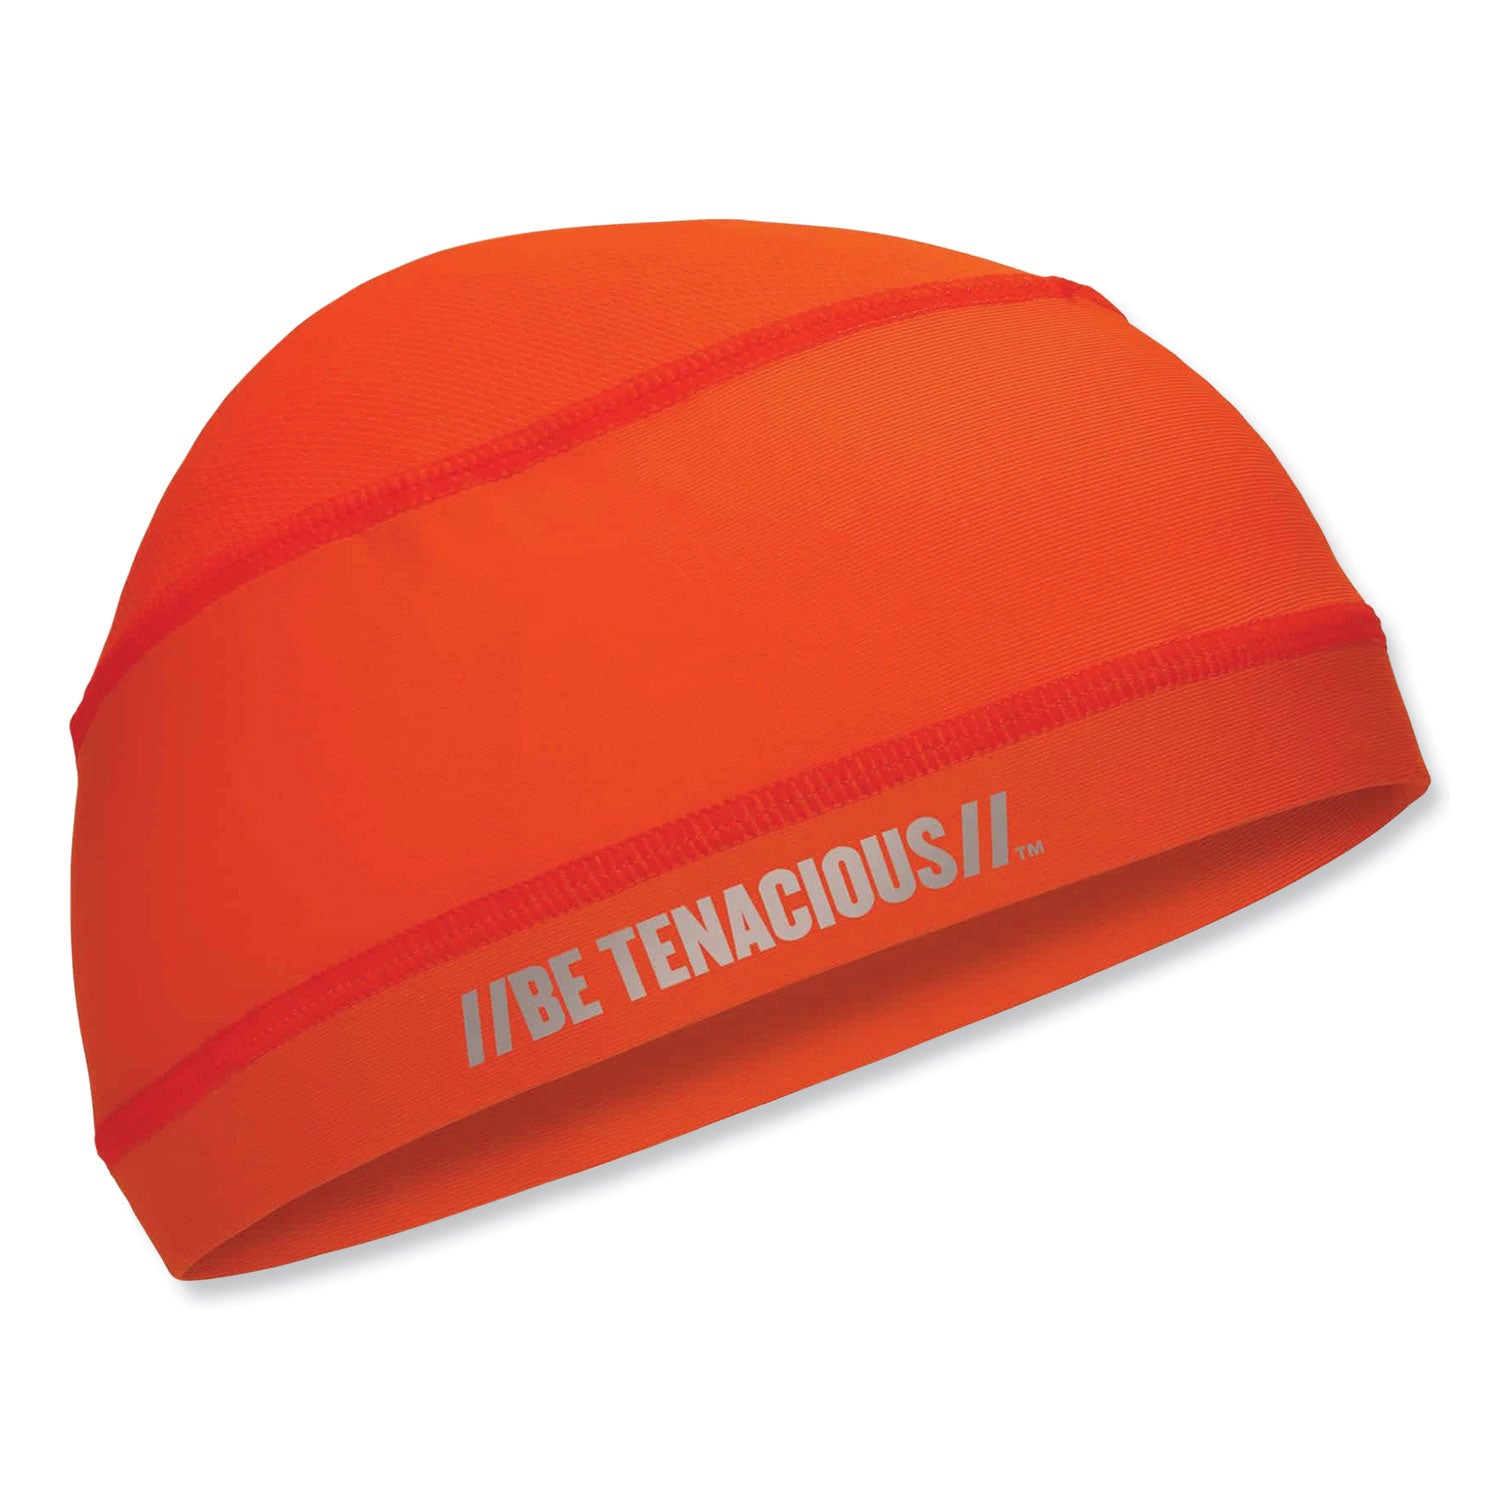 chill-its-6632-performance-knit-cooling-skull-cap-polyester-spandex-one-size-fits-most-orange-ships-in-1-3-business-days_ego12688 - 1